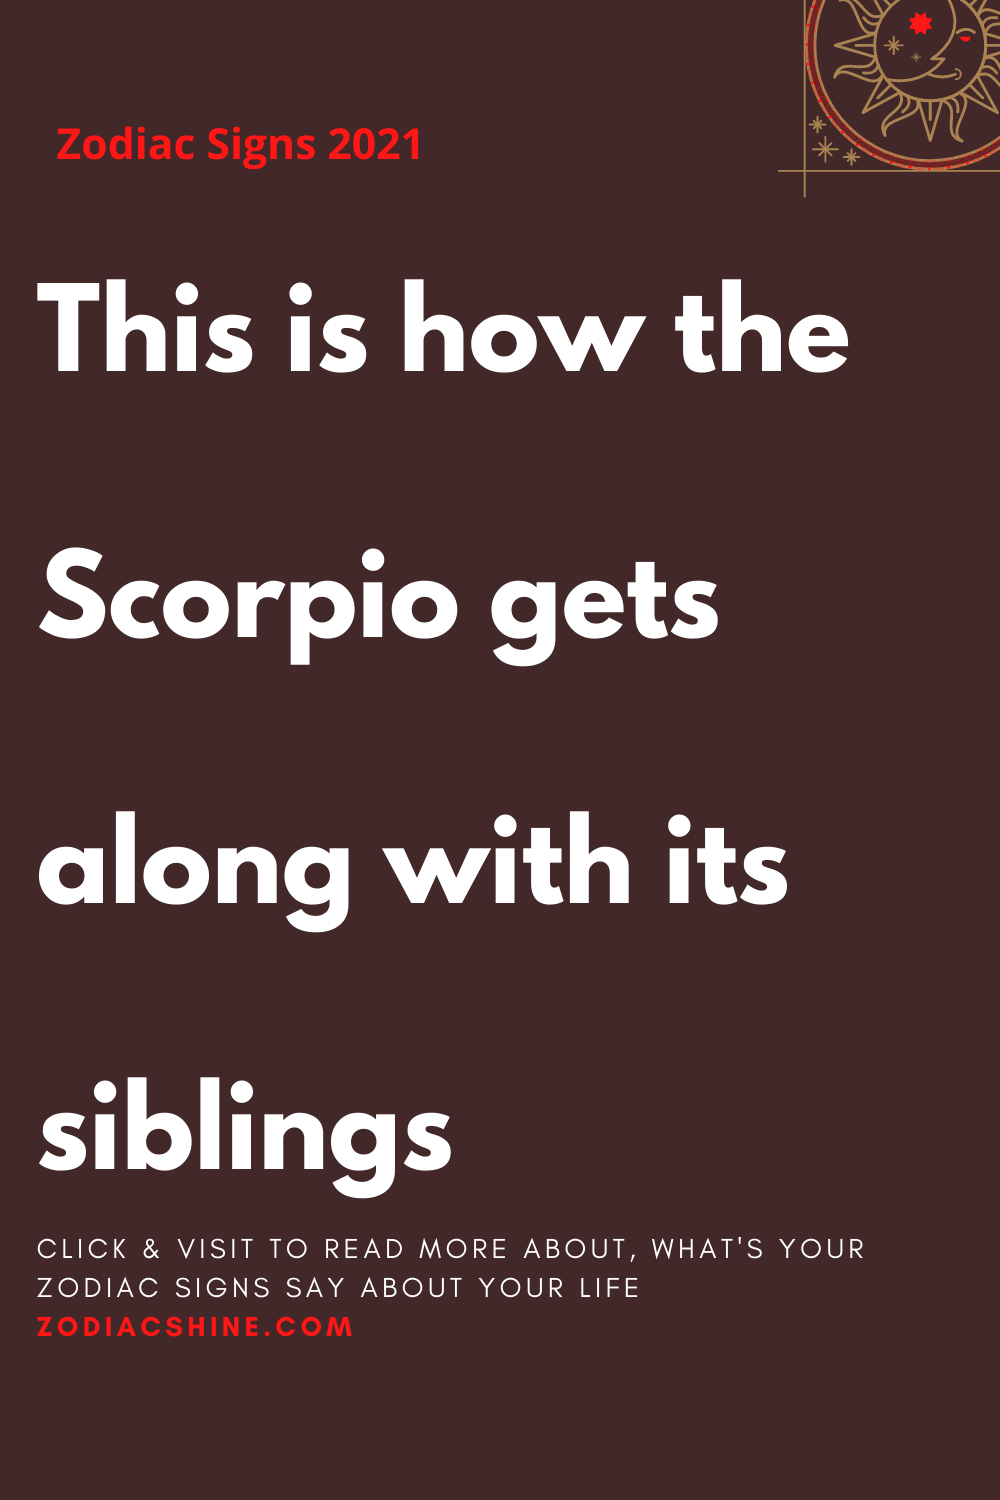 This is how the Scorpio gets along with its siblings